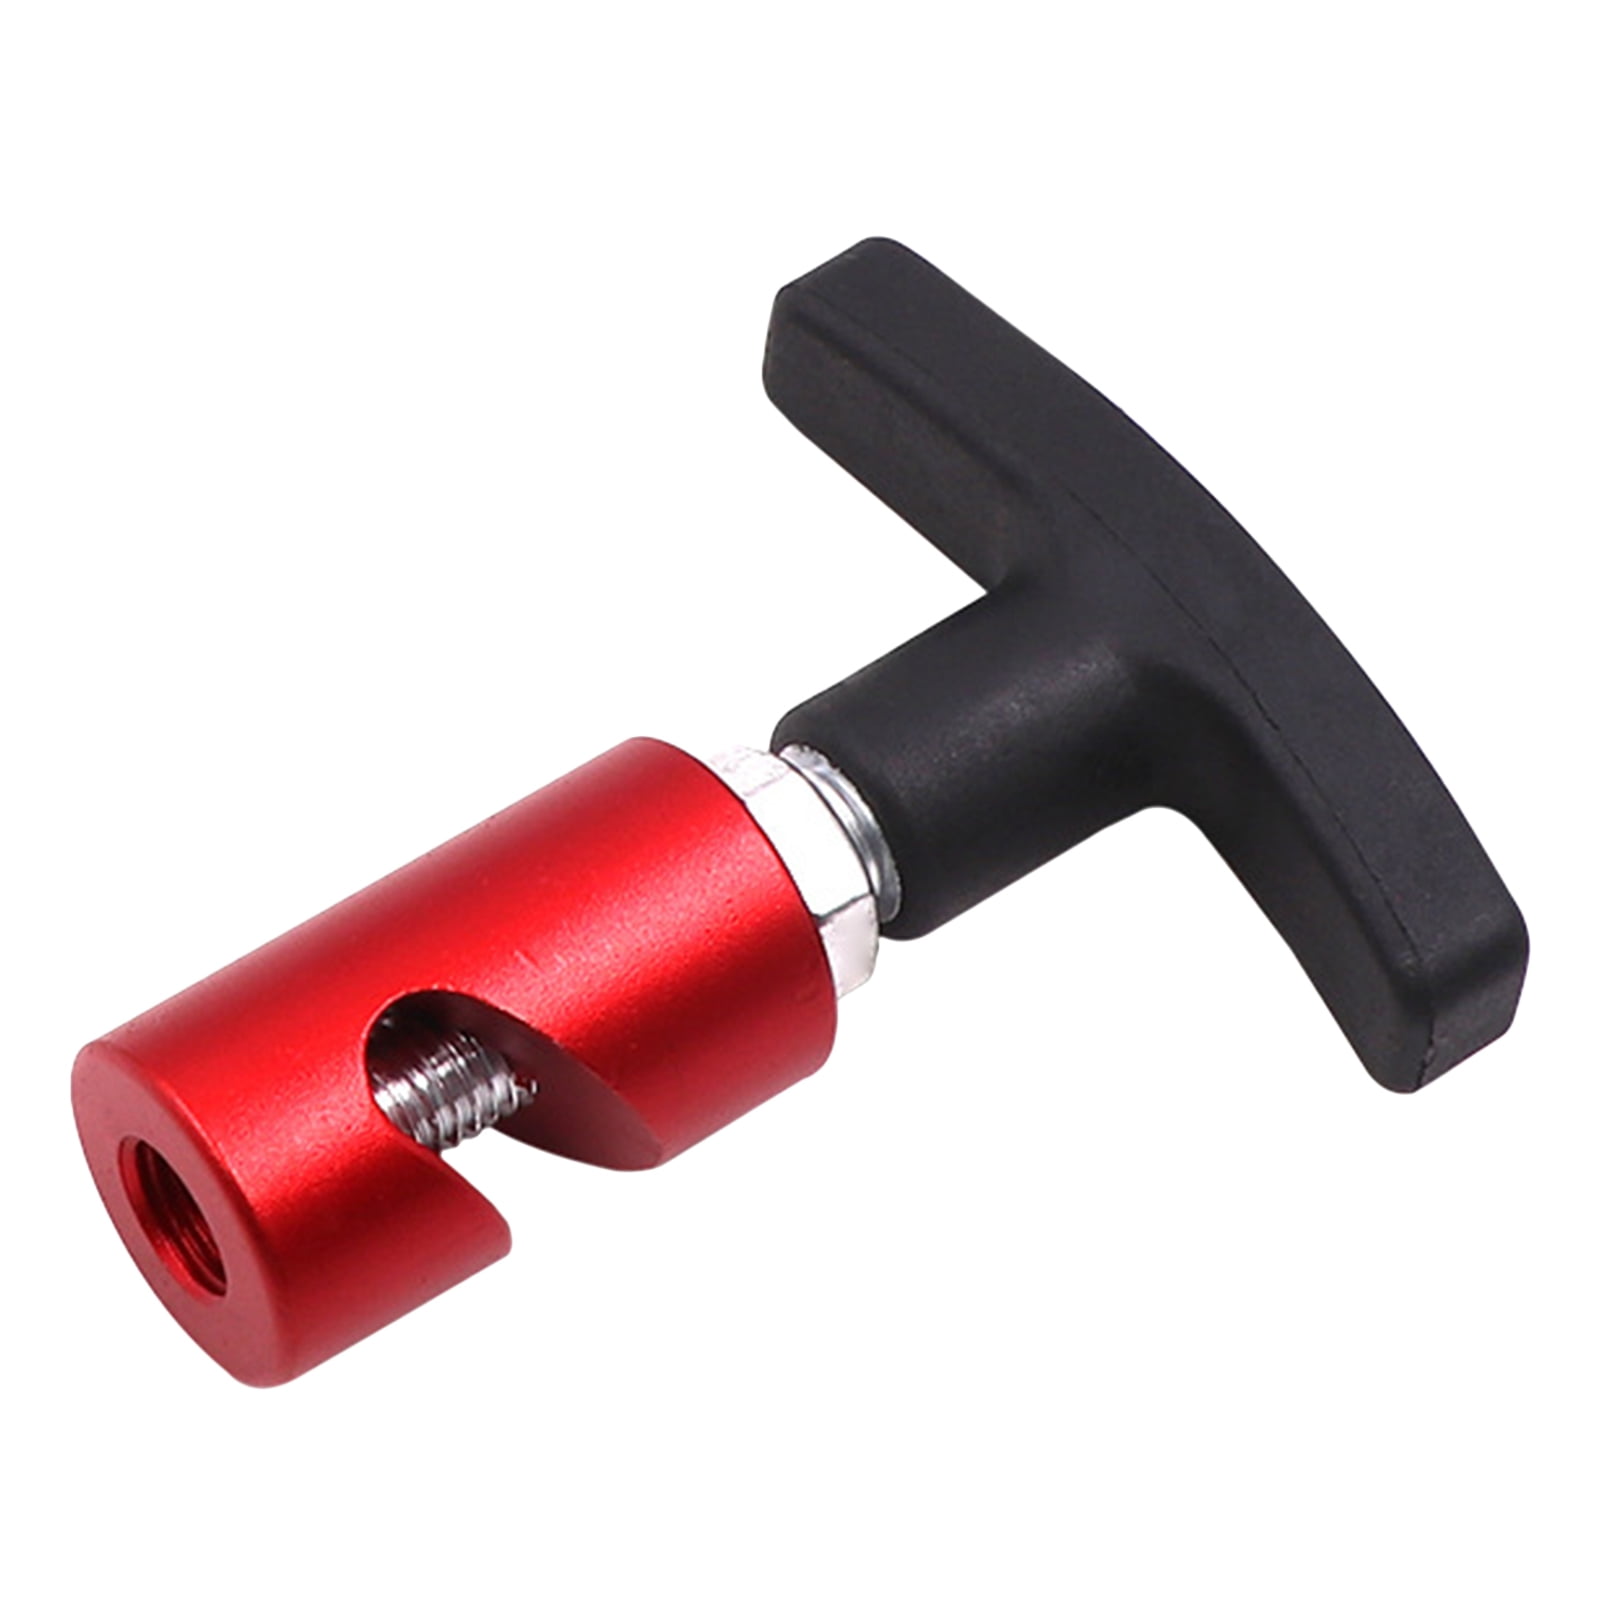 Details about   AUTO BODY Hood Lifter Picker Panel Puller HOLDER Tool 